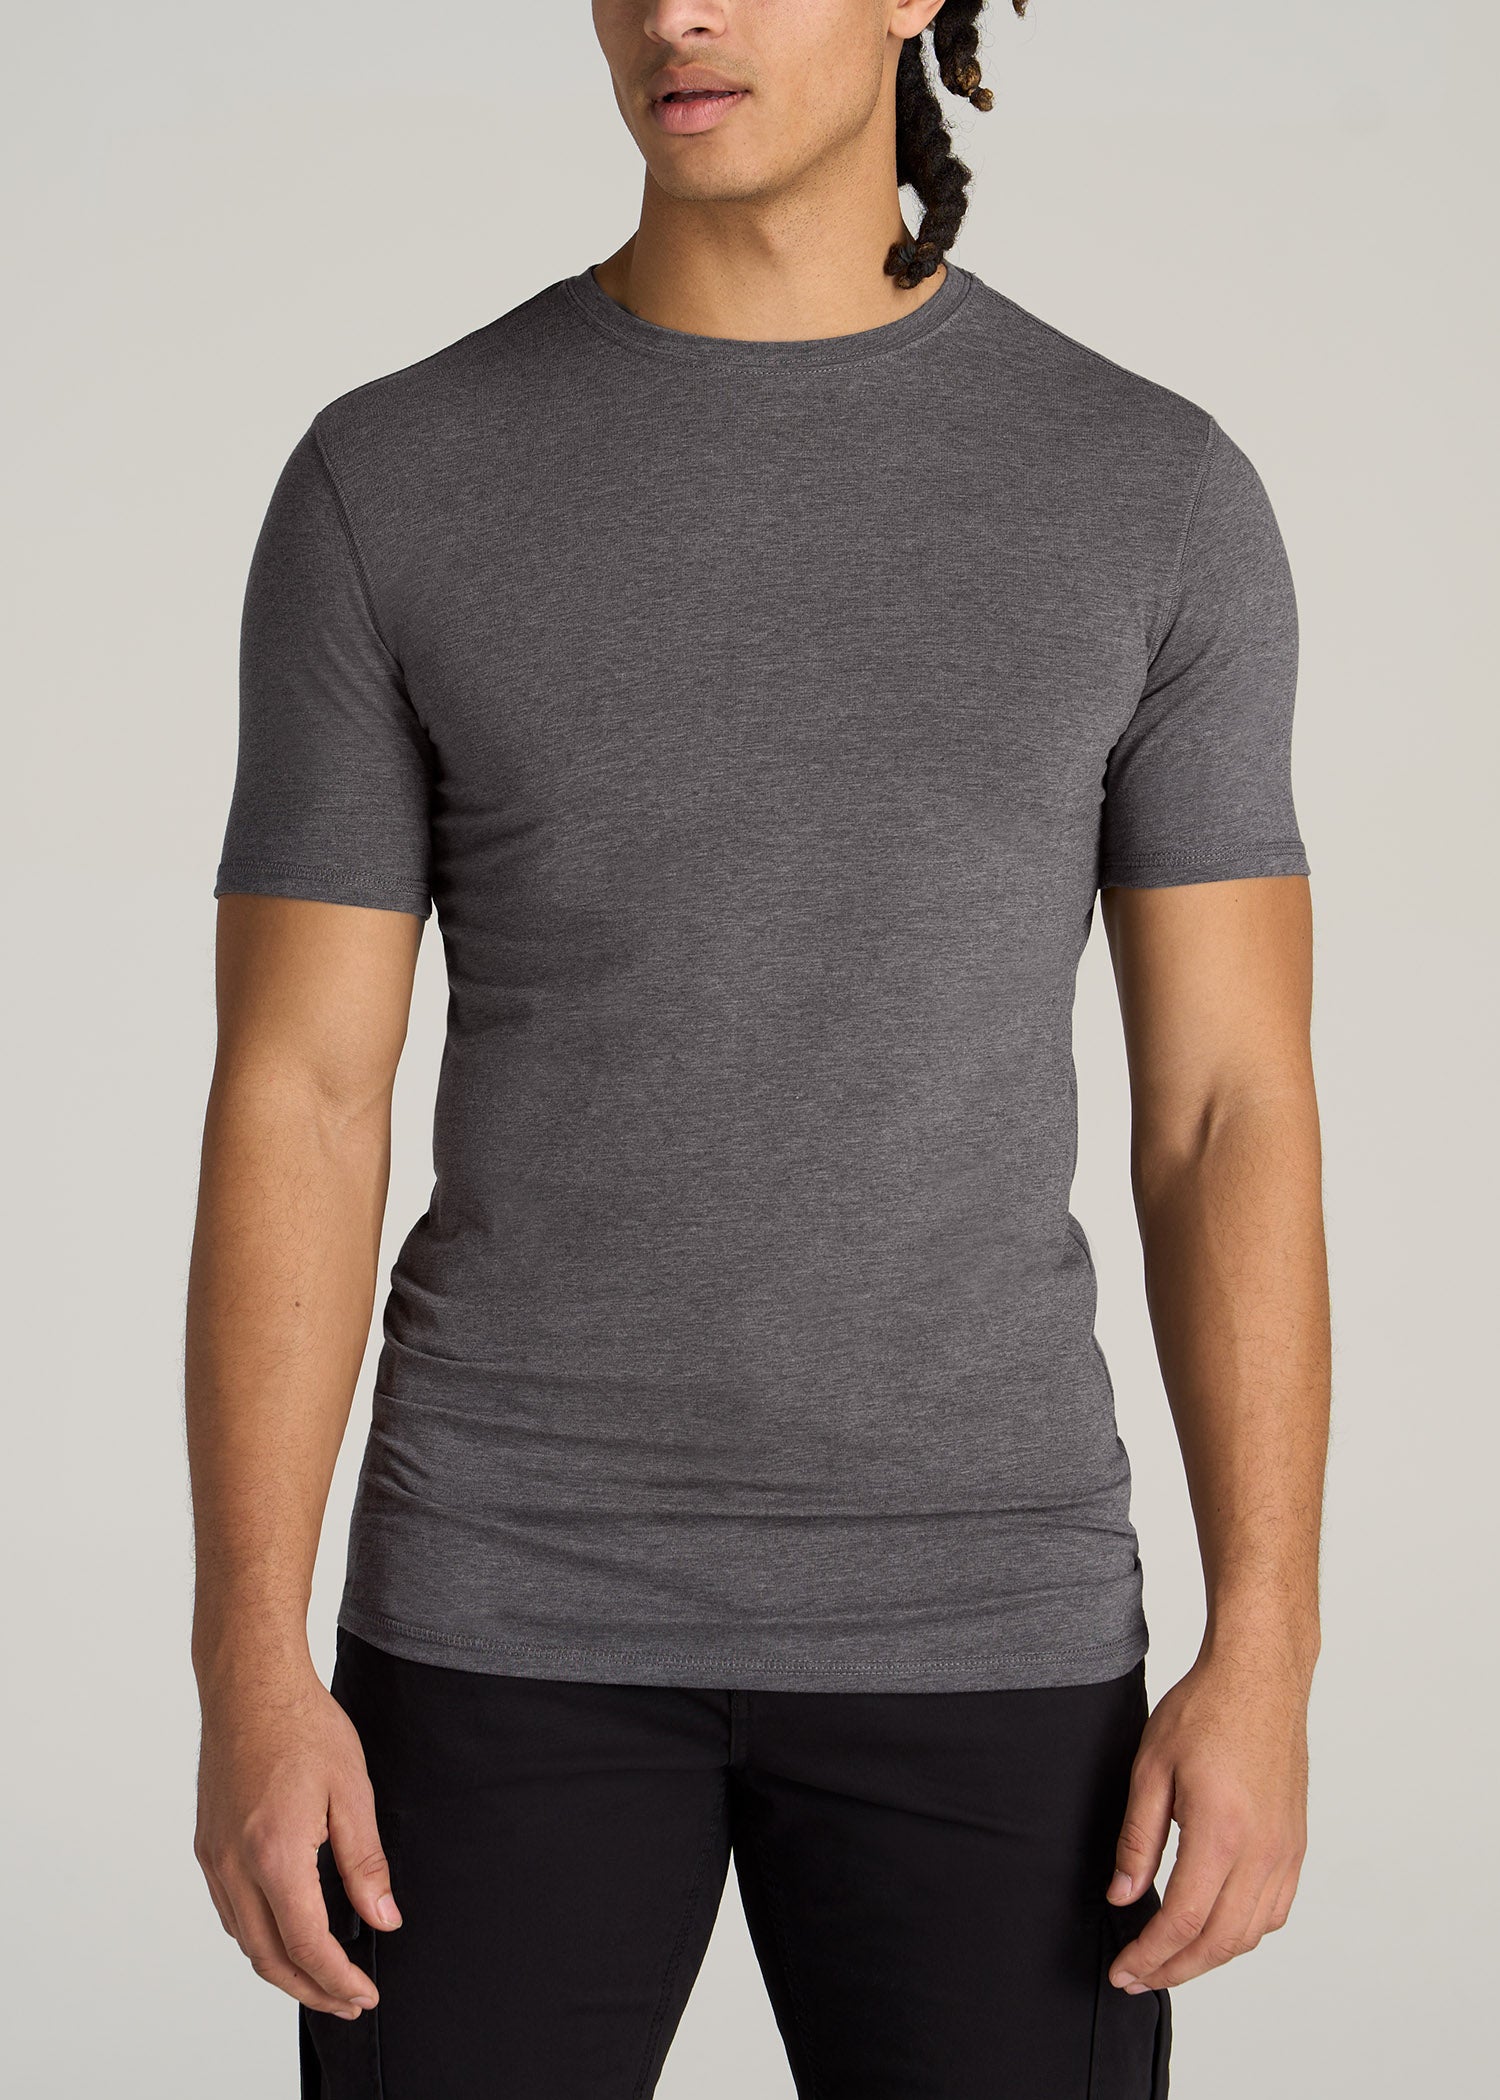    American-Tall-Men-Essential-SLIM-FIT-Crew-Neck-Tees-Charocal-Mix-front